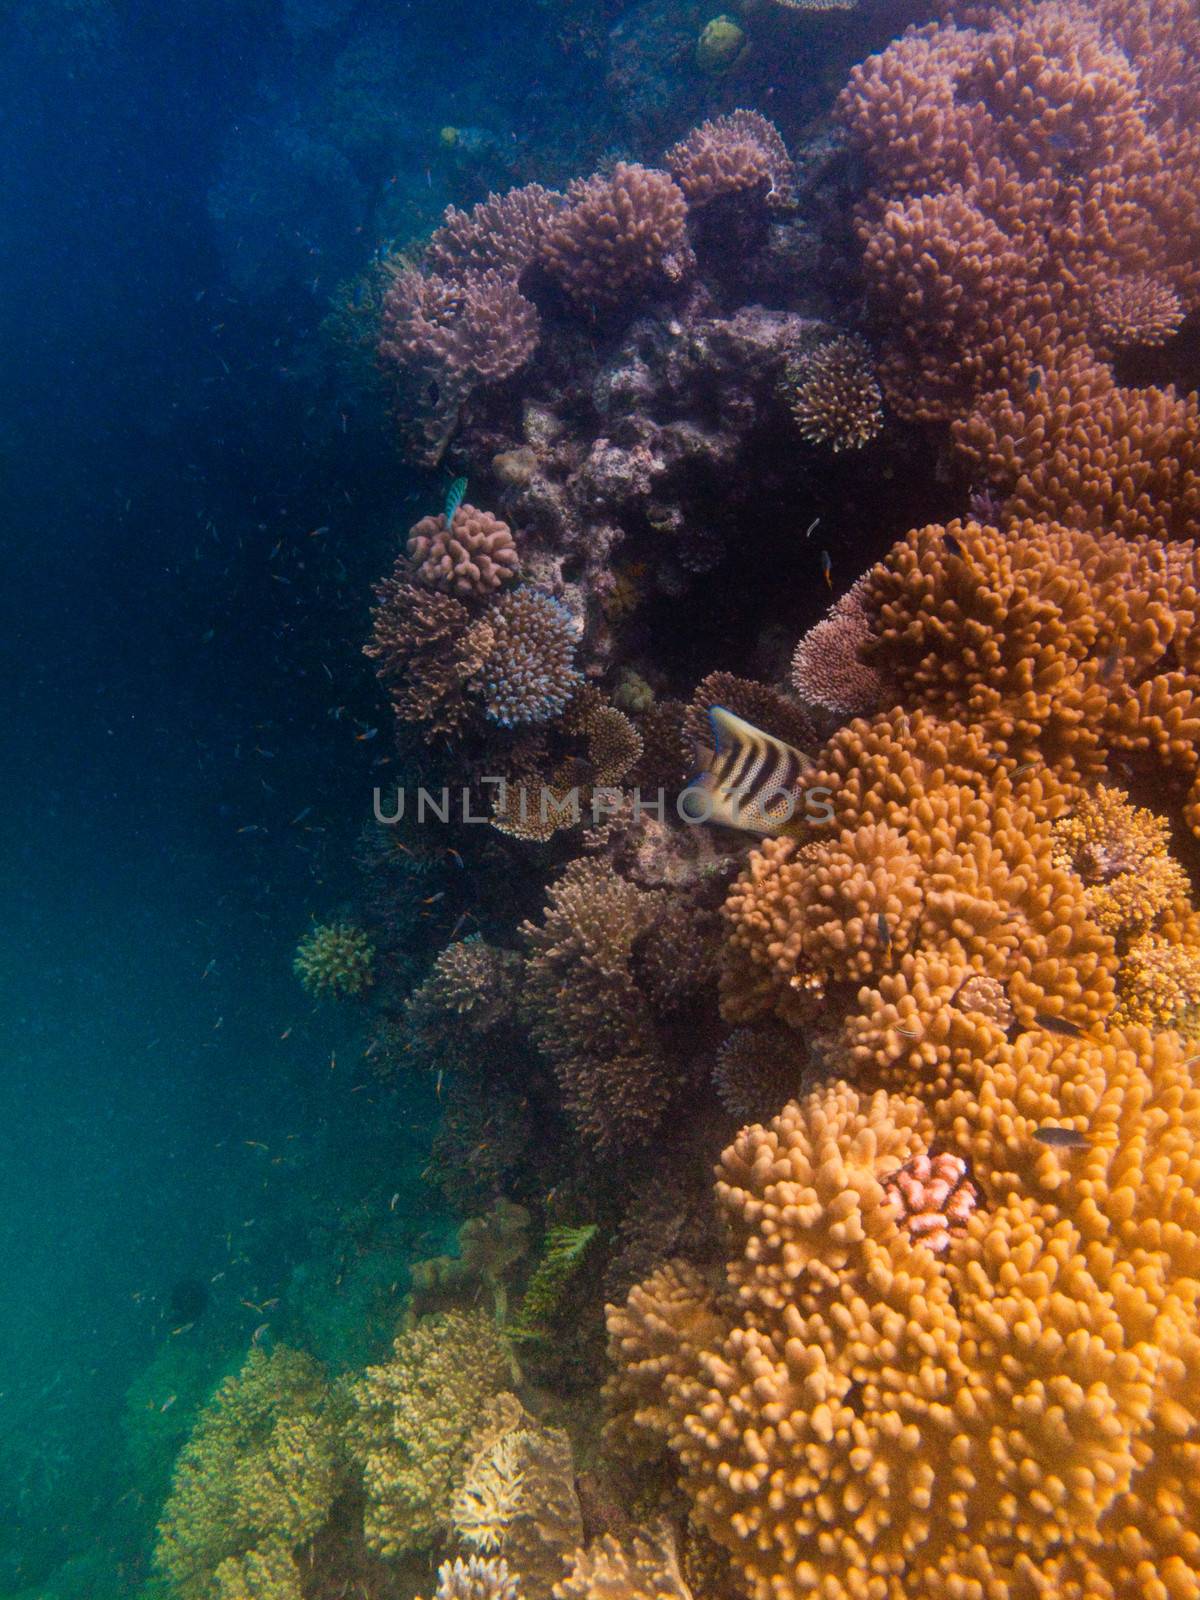 Under water shot of the coral reef by jrstock